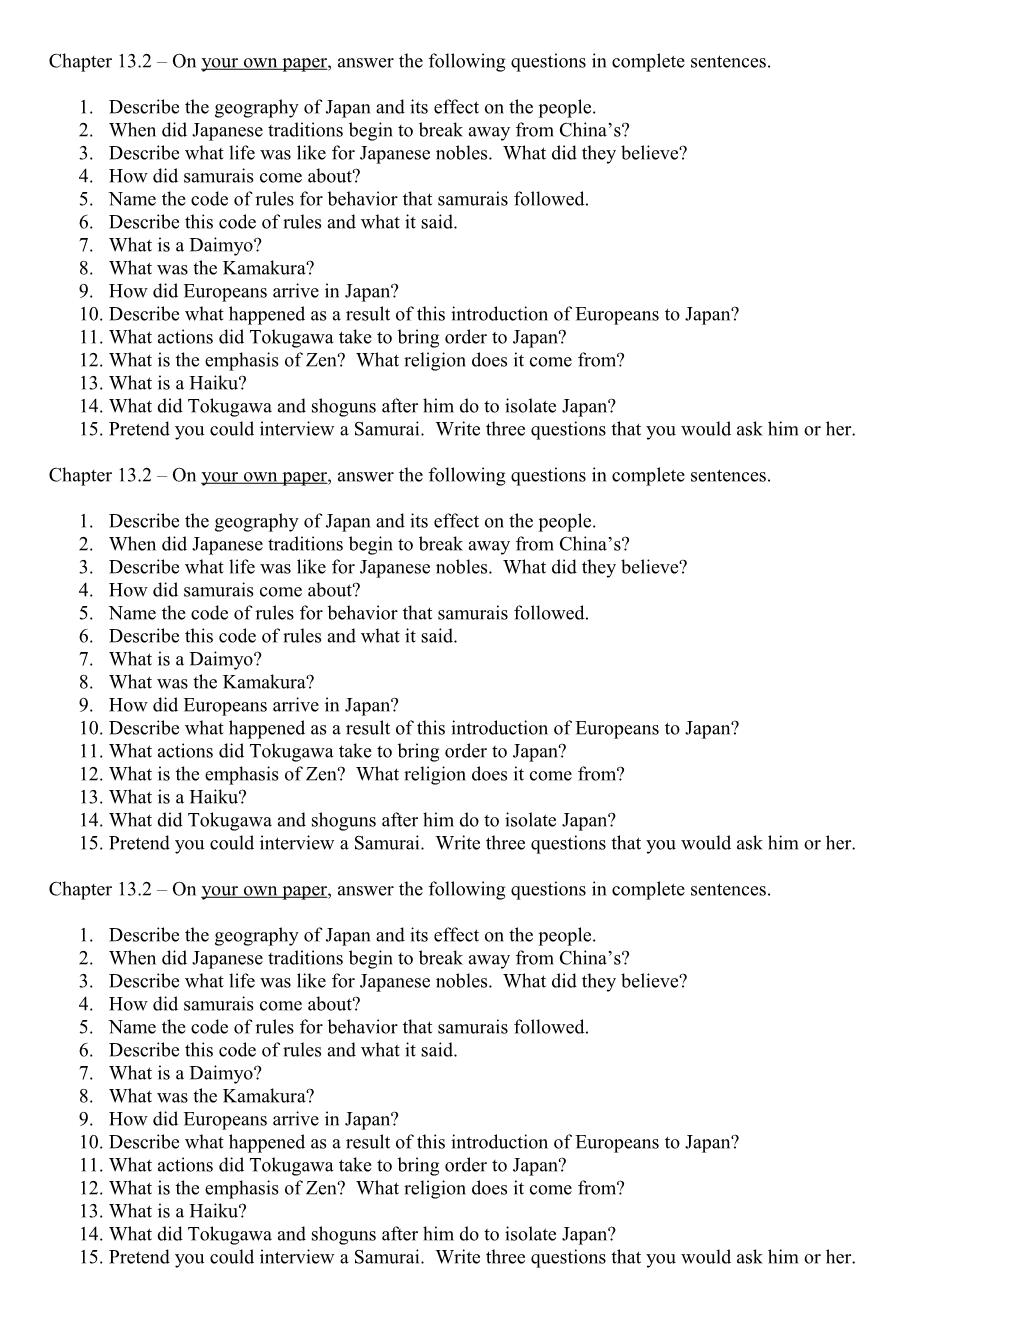 Chapter 13.2 on Your Own Paper, Answer the Following Questions in Complete Sentences